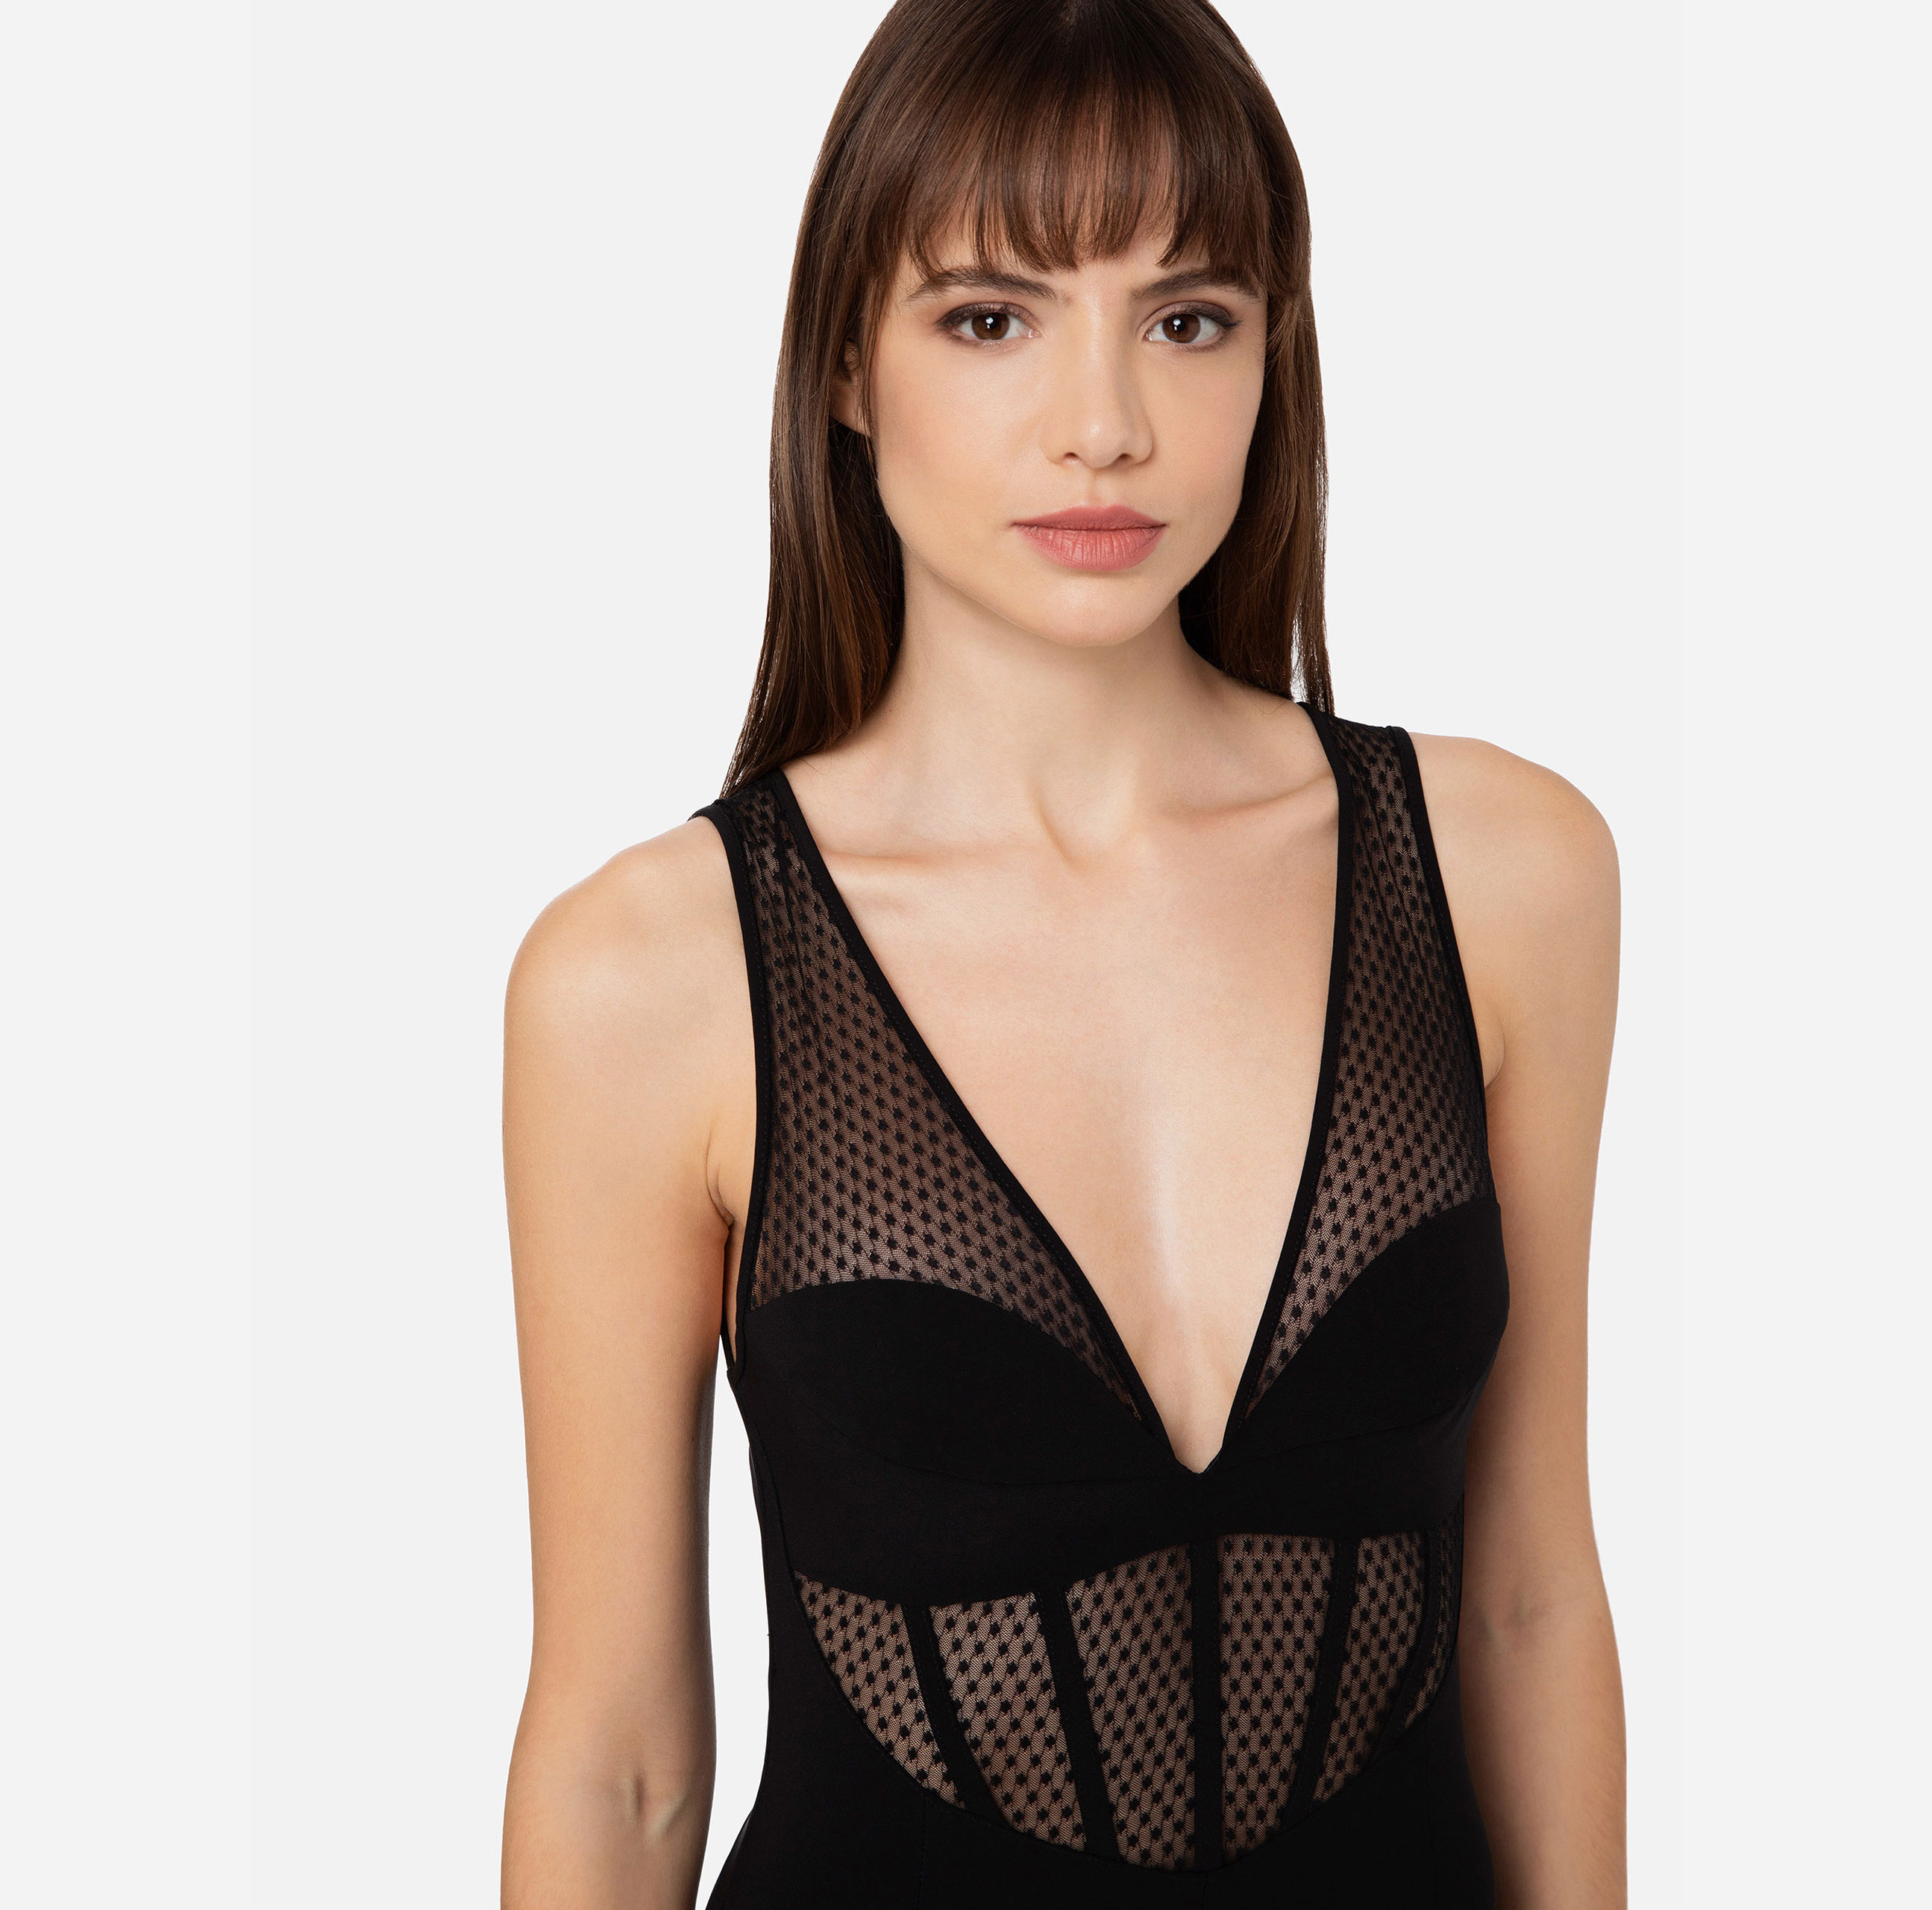 Bustier jumpsuit with tulle inserts - Elisabetta Franchi